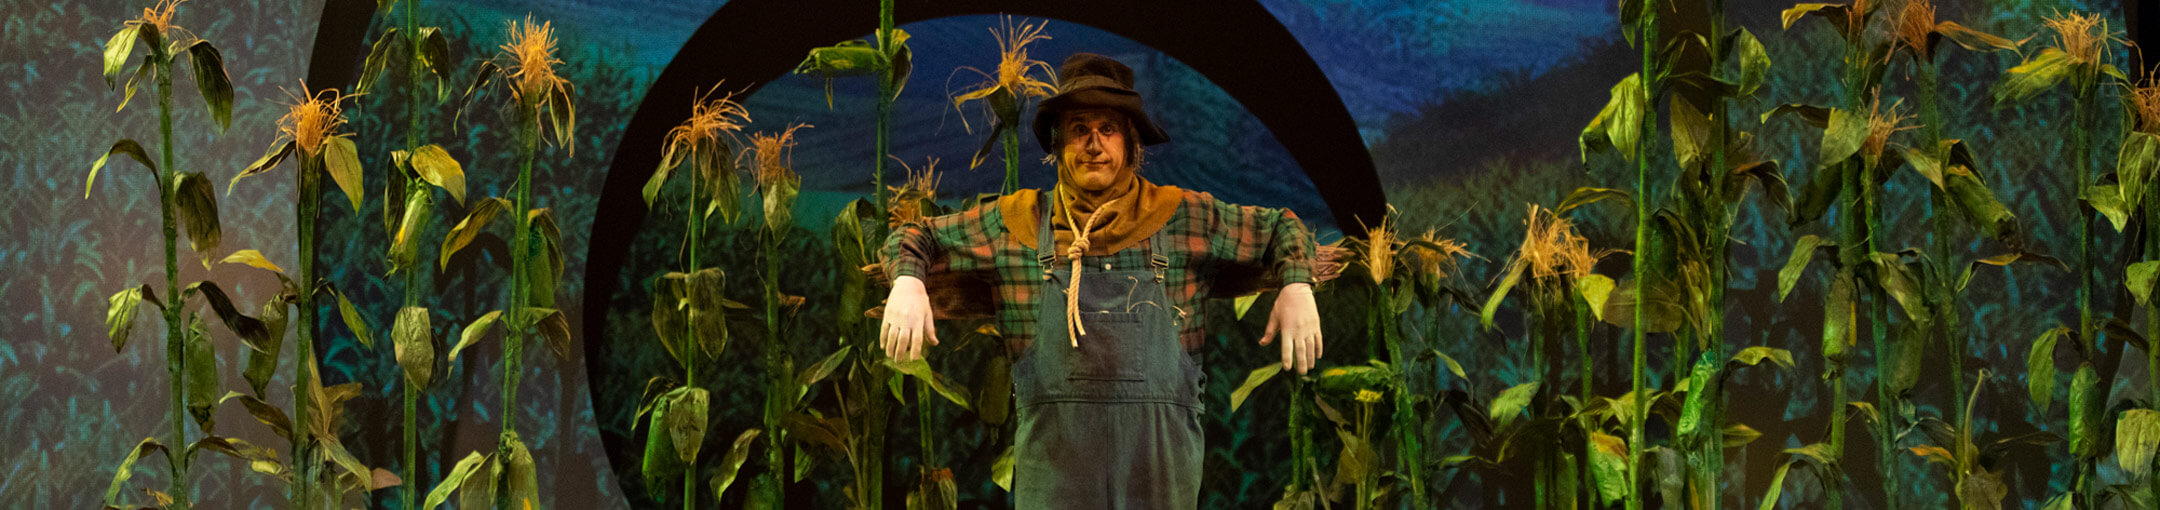 An RIT actor playing the part of the scarecrow from the Wizard of Oz.